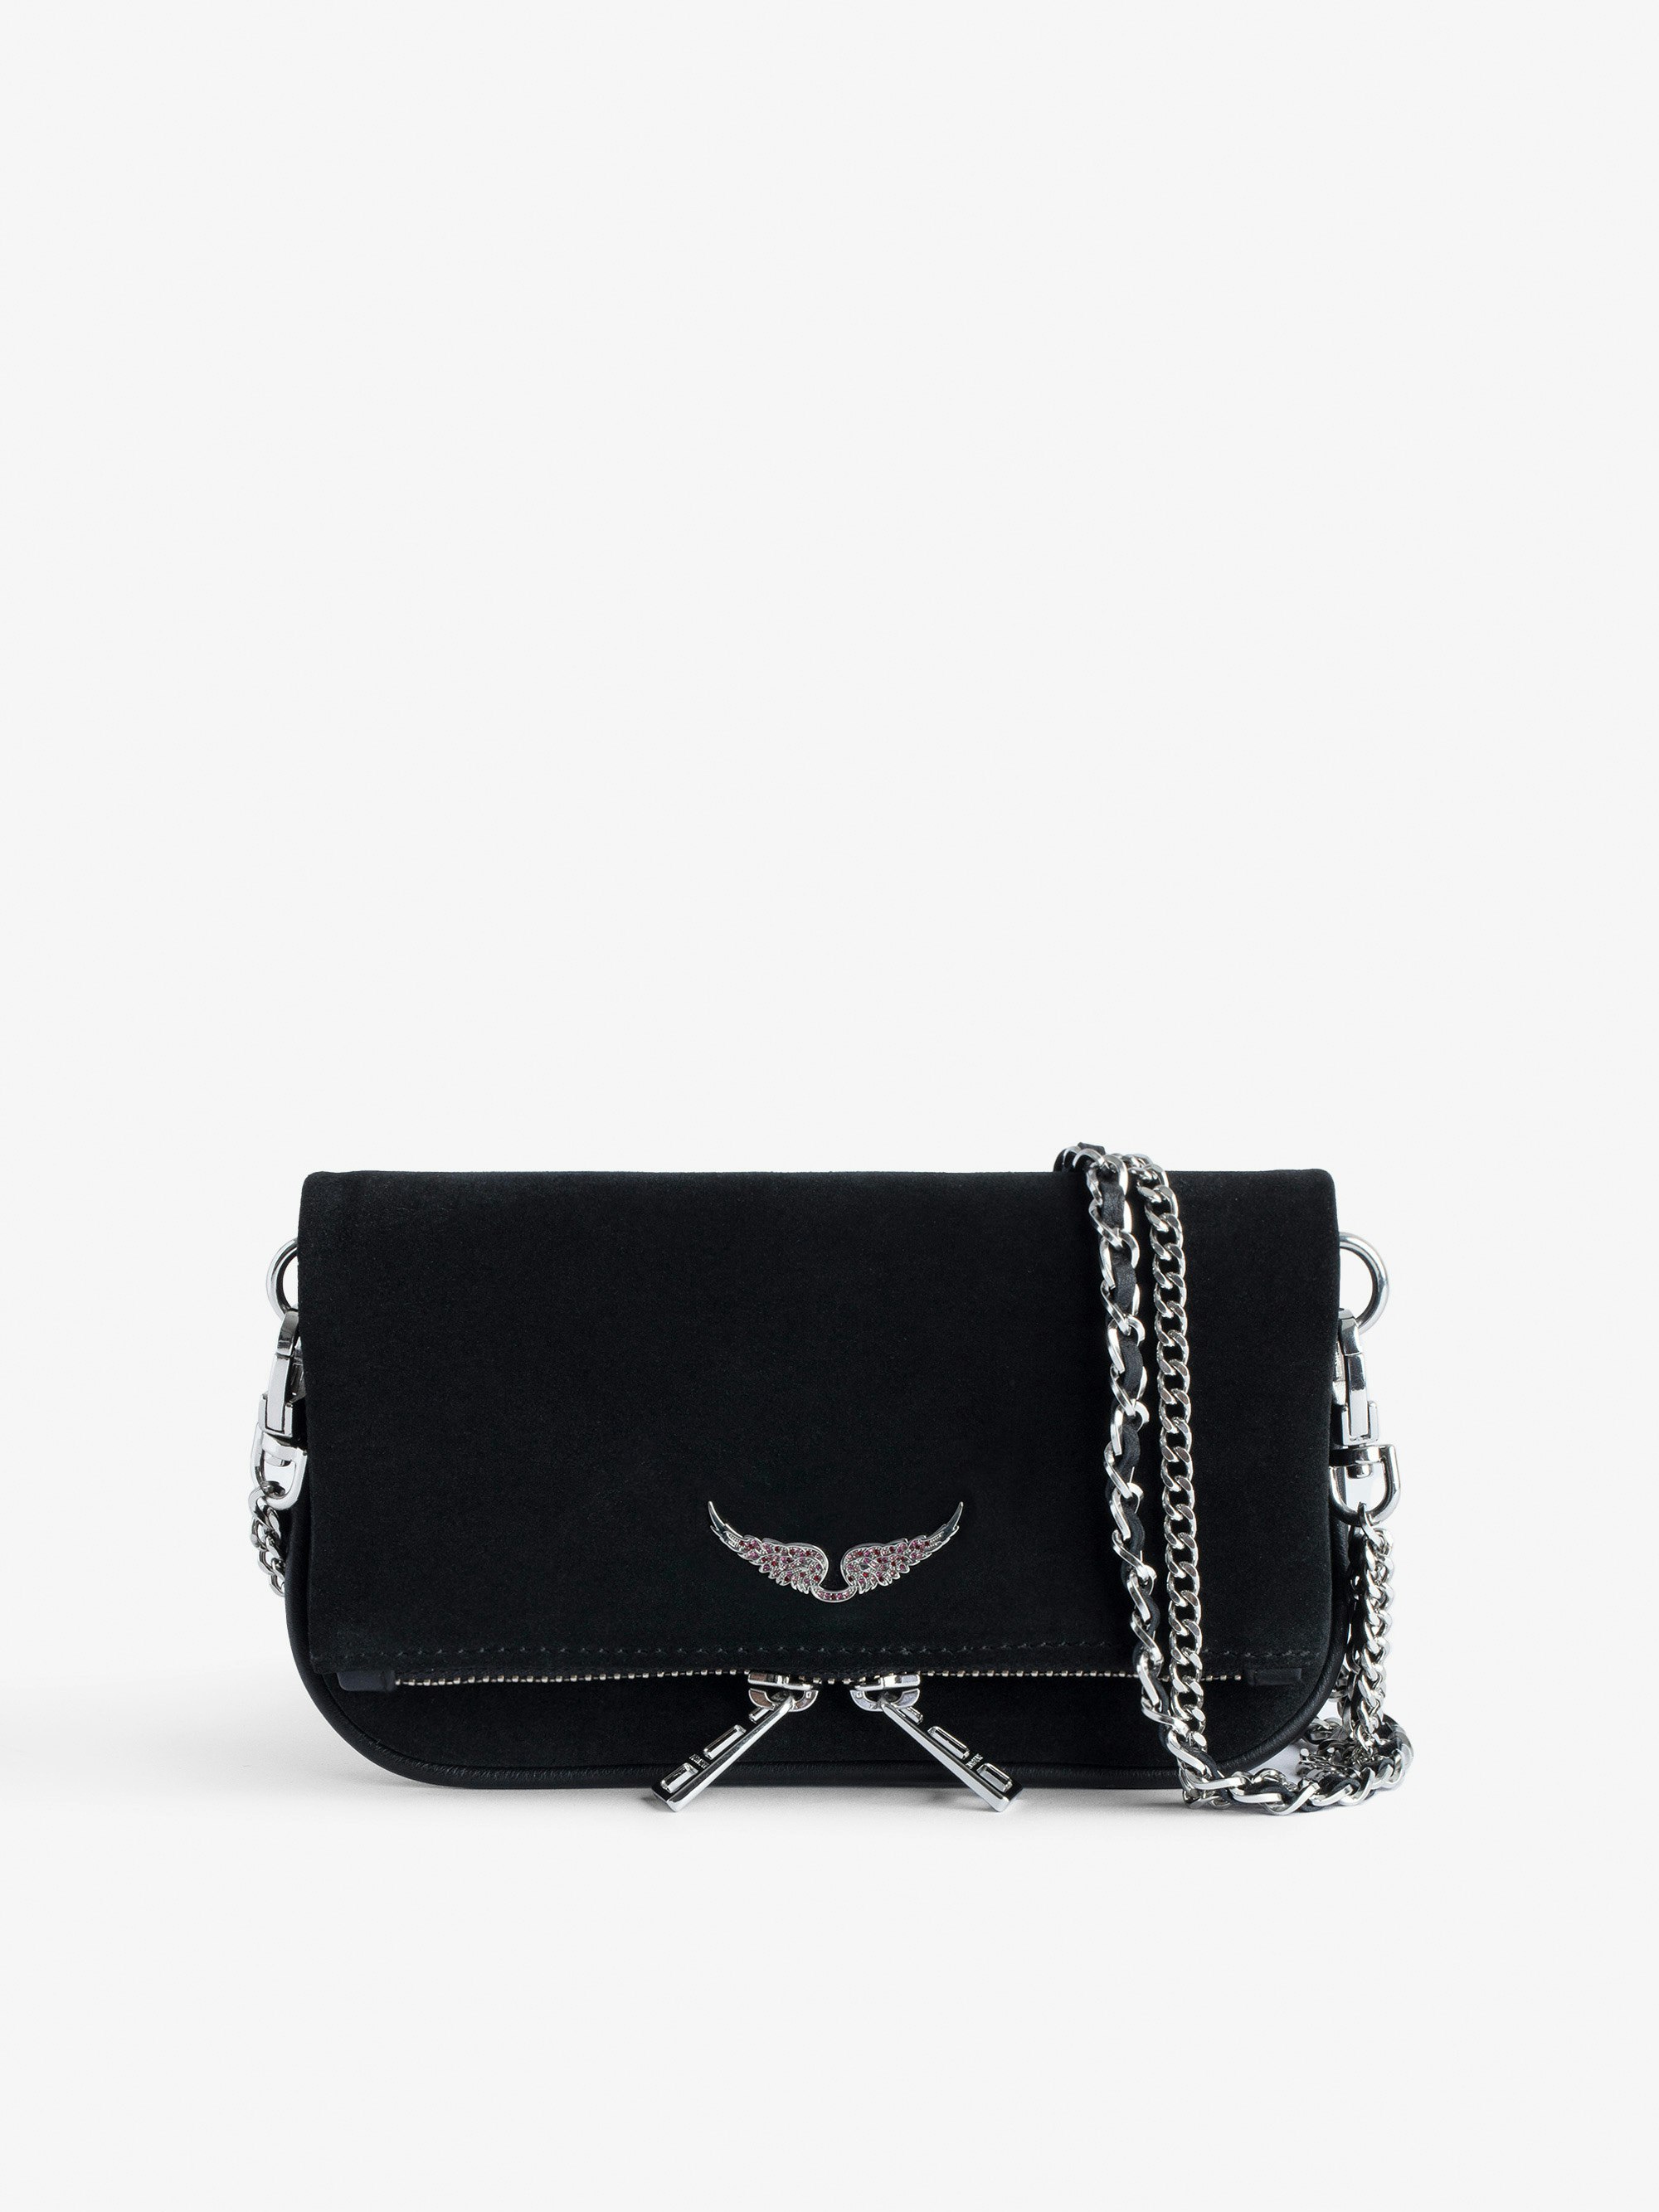 Rock Nano Suede Clutch - Small Rock Nano black suede clutch with double leather and metal chain strap.